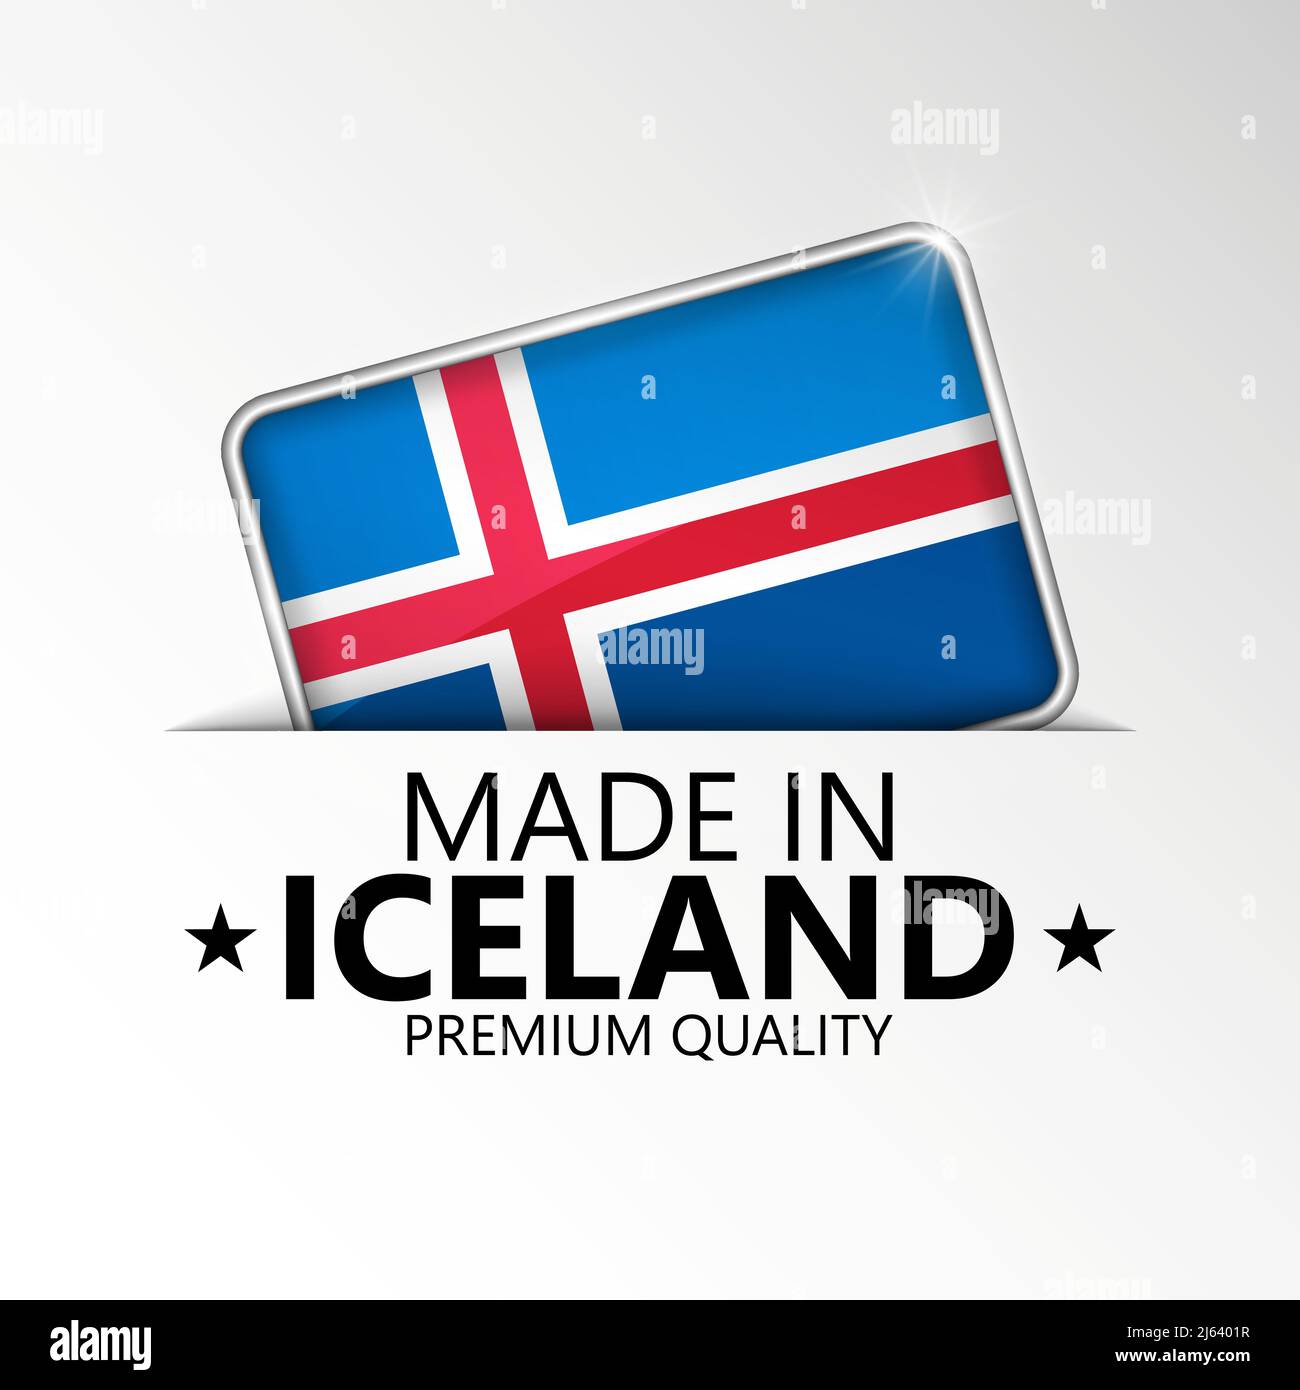 Made in Iceland graphic and label. Element of impact for the use you want to make of it. Stock Vector